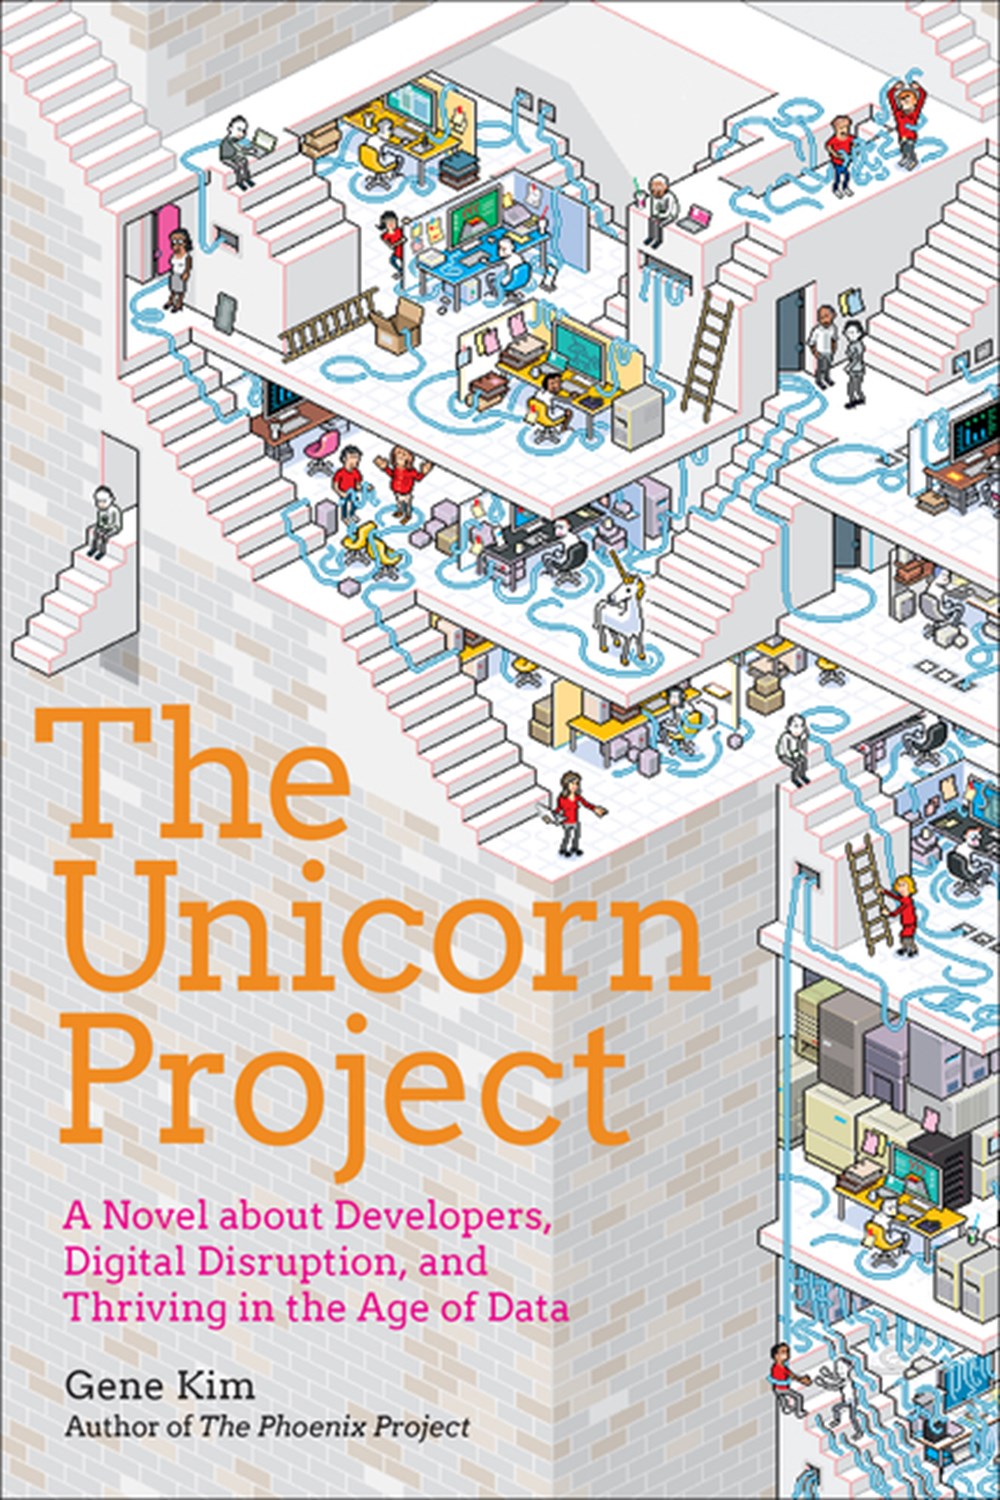 Unicorn Project A Novel about Developers, Digital Disruption, and Thriving in the Age of Data